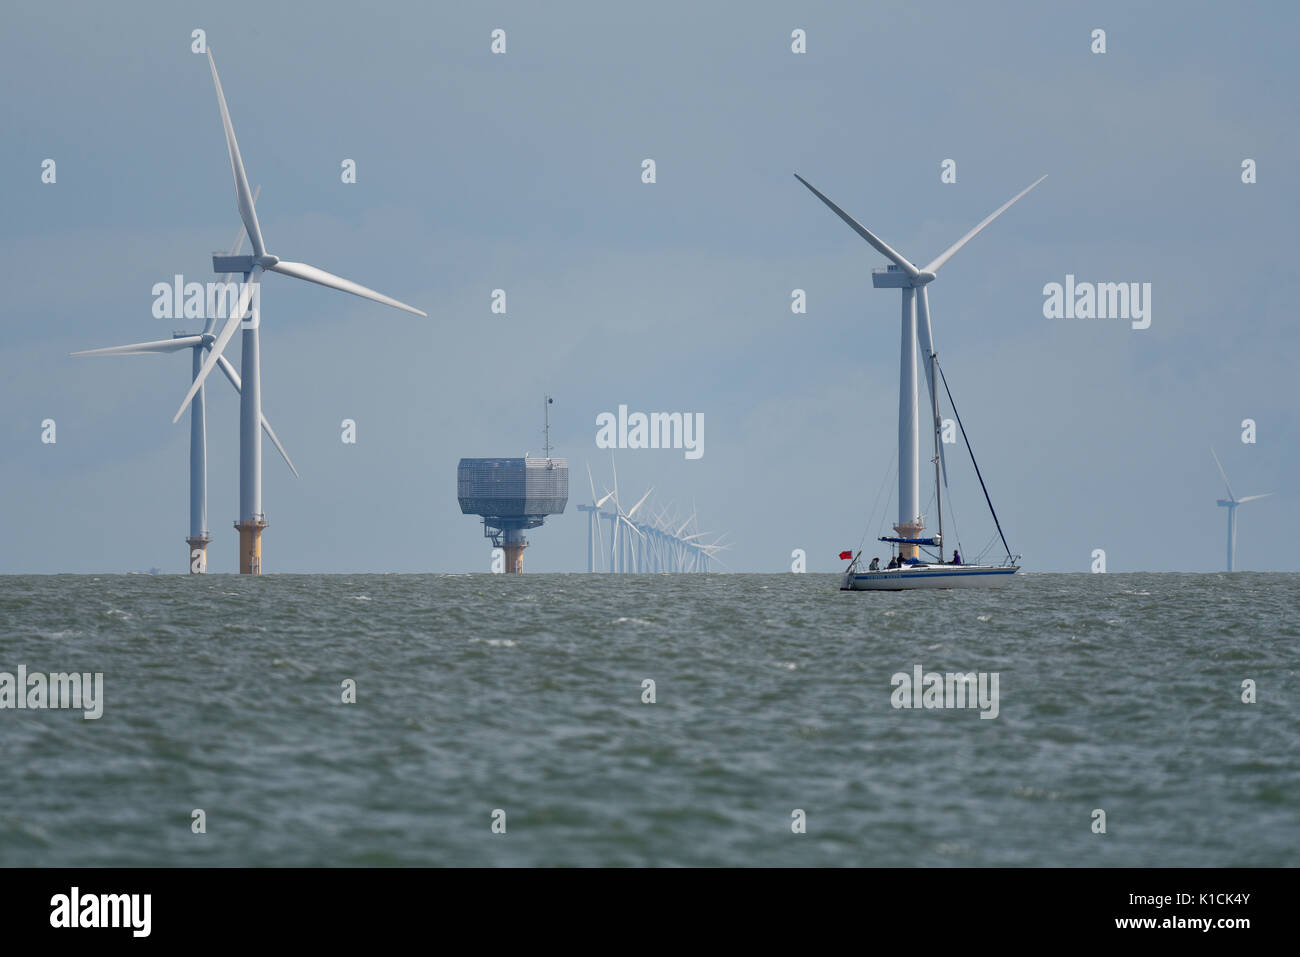 Gunfleet Sands Offshore Wind Farm near Clacton, Essex, in the Thames Estuary North Sea area. Built by DONG energy using Siemens Wind Power SWT-3.6-107 Stock Photo